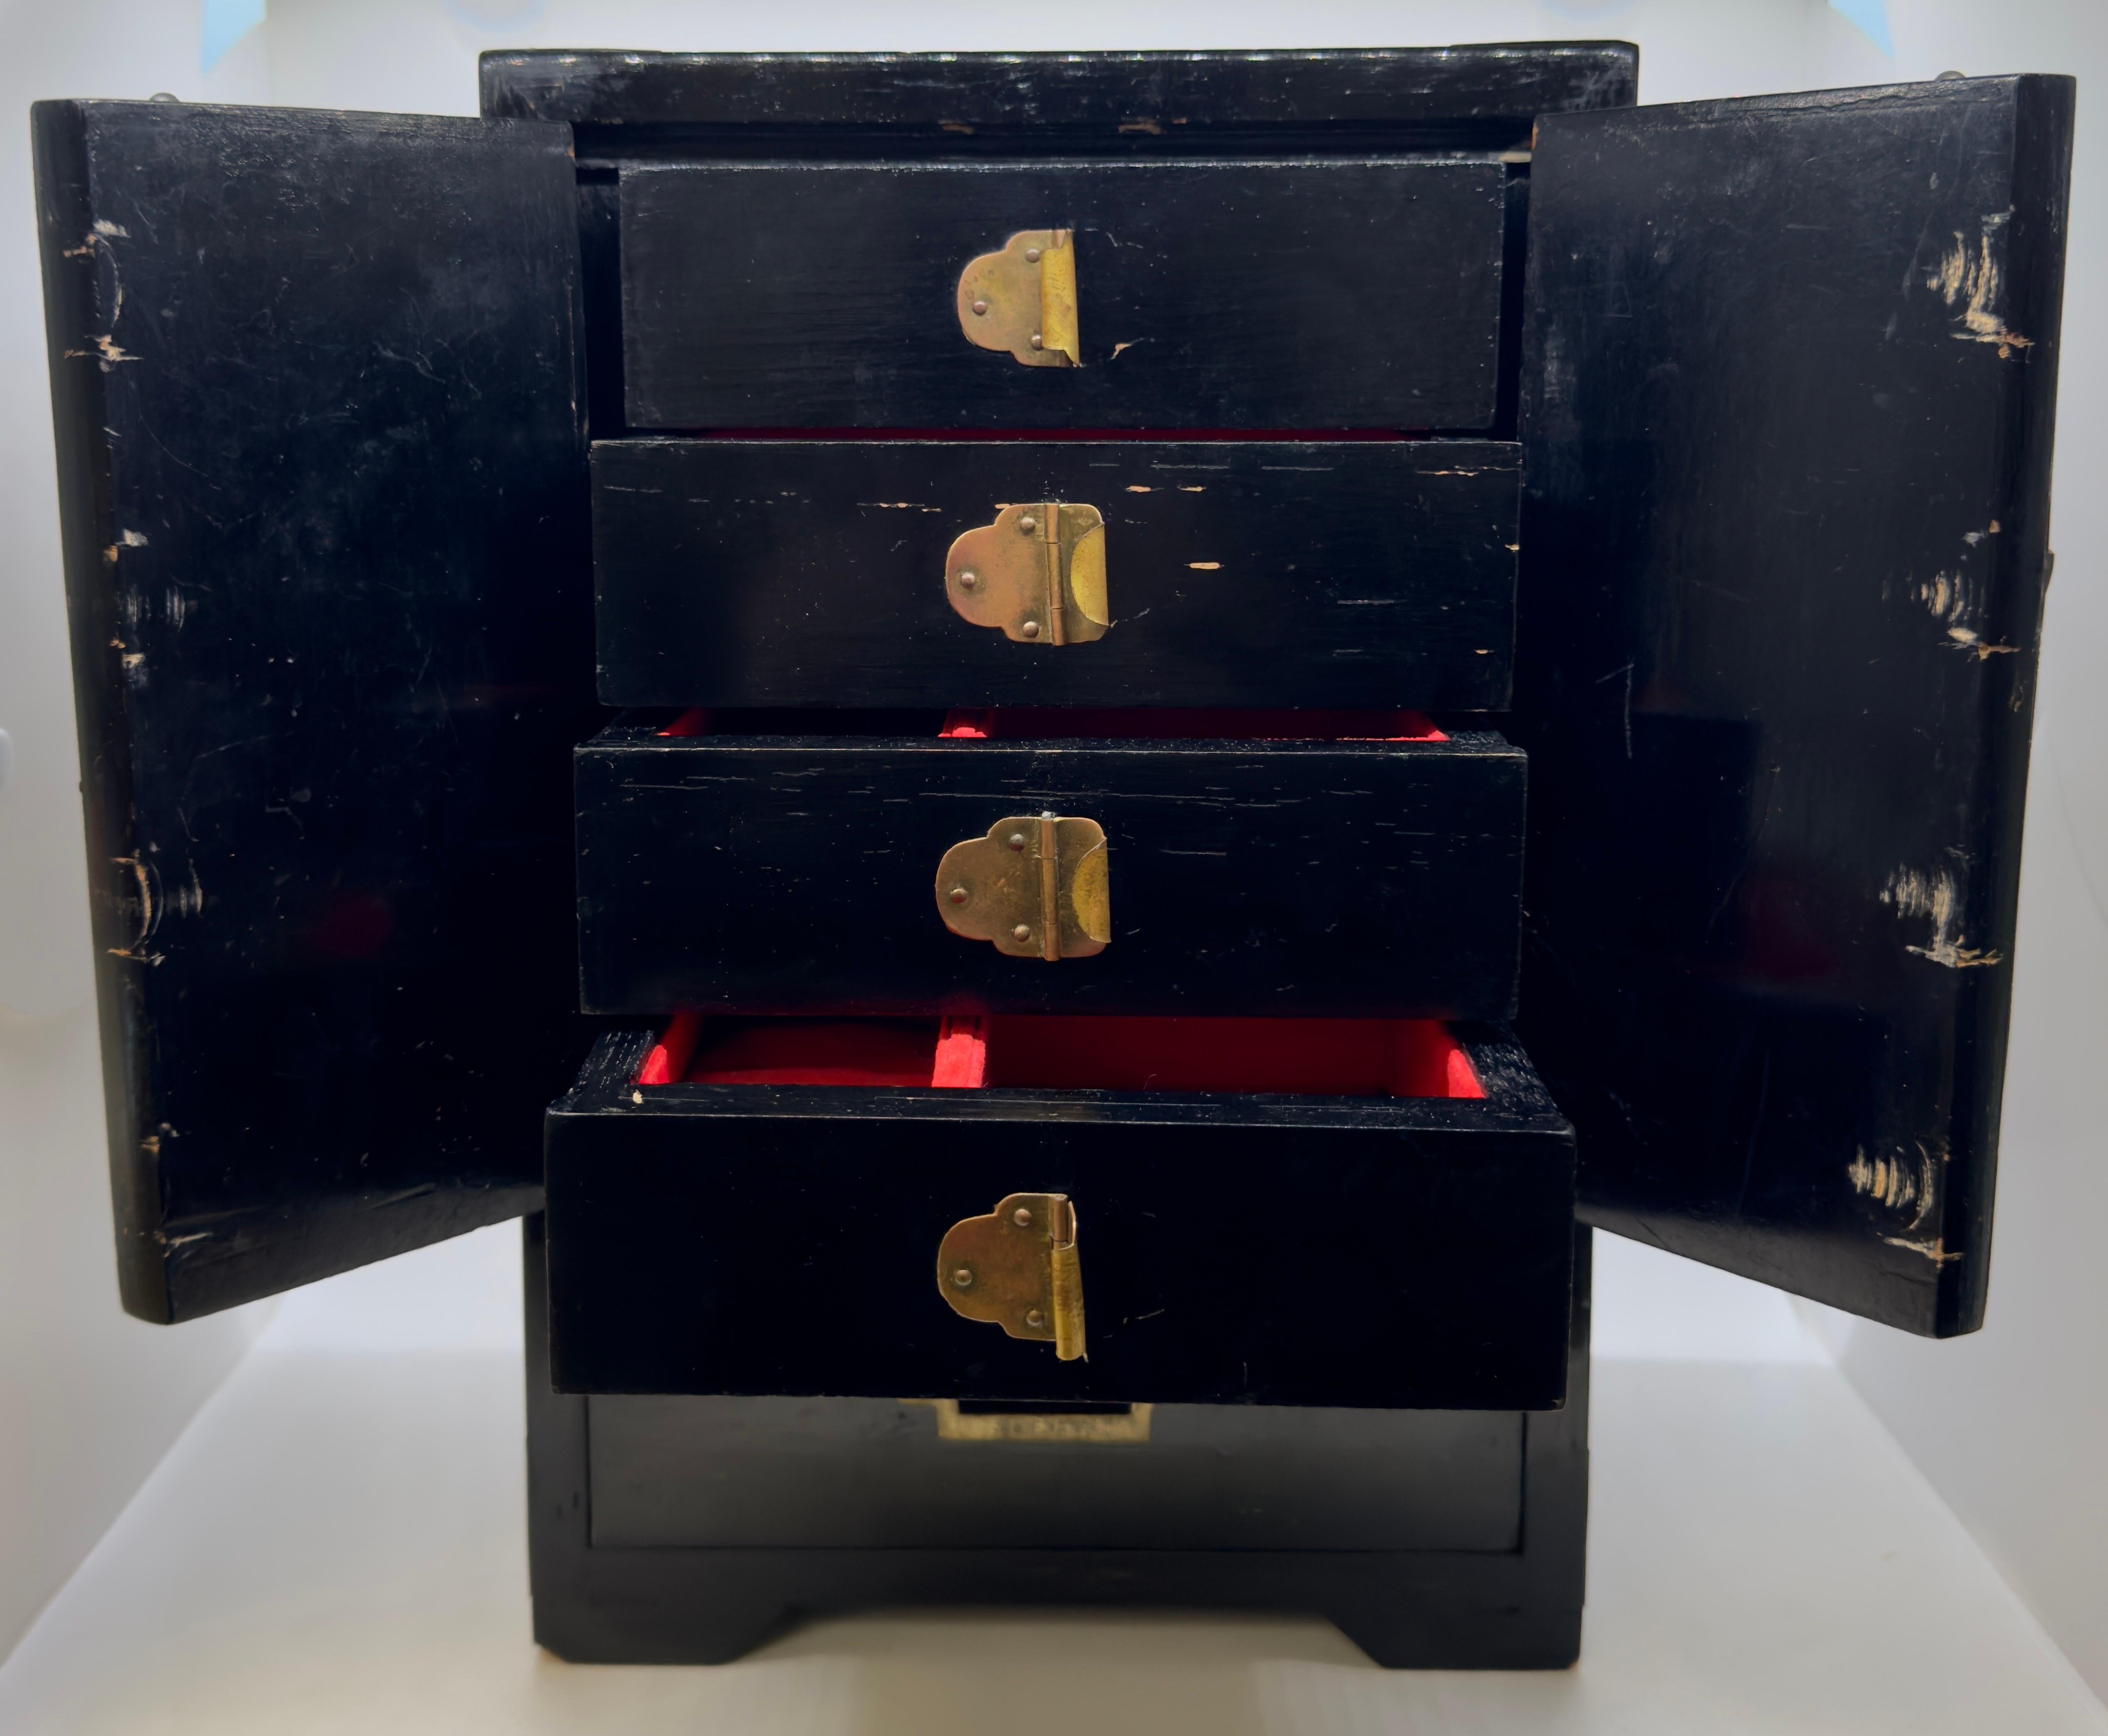 A Chinoiserie lacquered jewelry chest in striking black. The chest features two doors adorned with graceful women figures facing aha other. Upon opening these doors, a treasure trove awaits within—four small drawers delicately crafted to house your